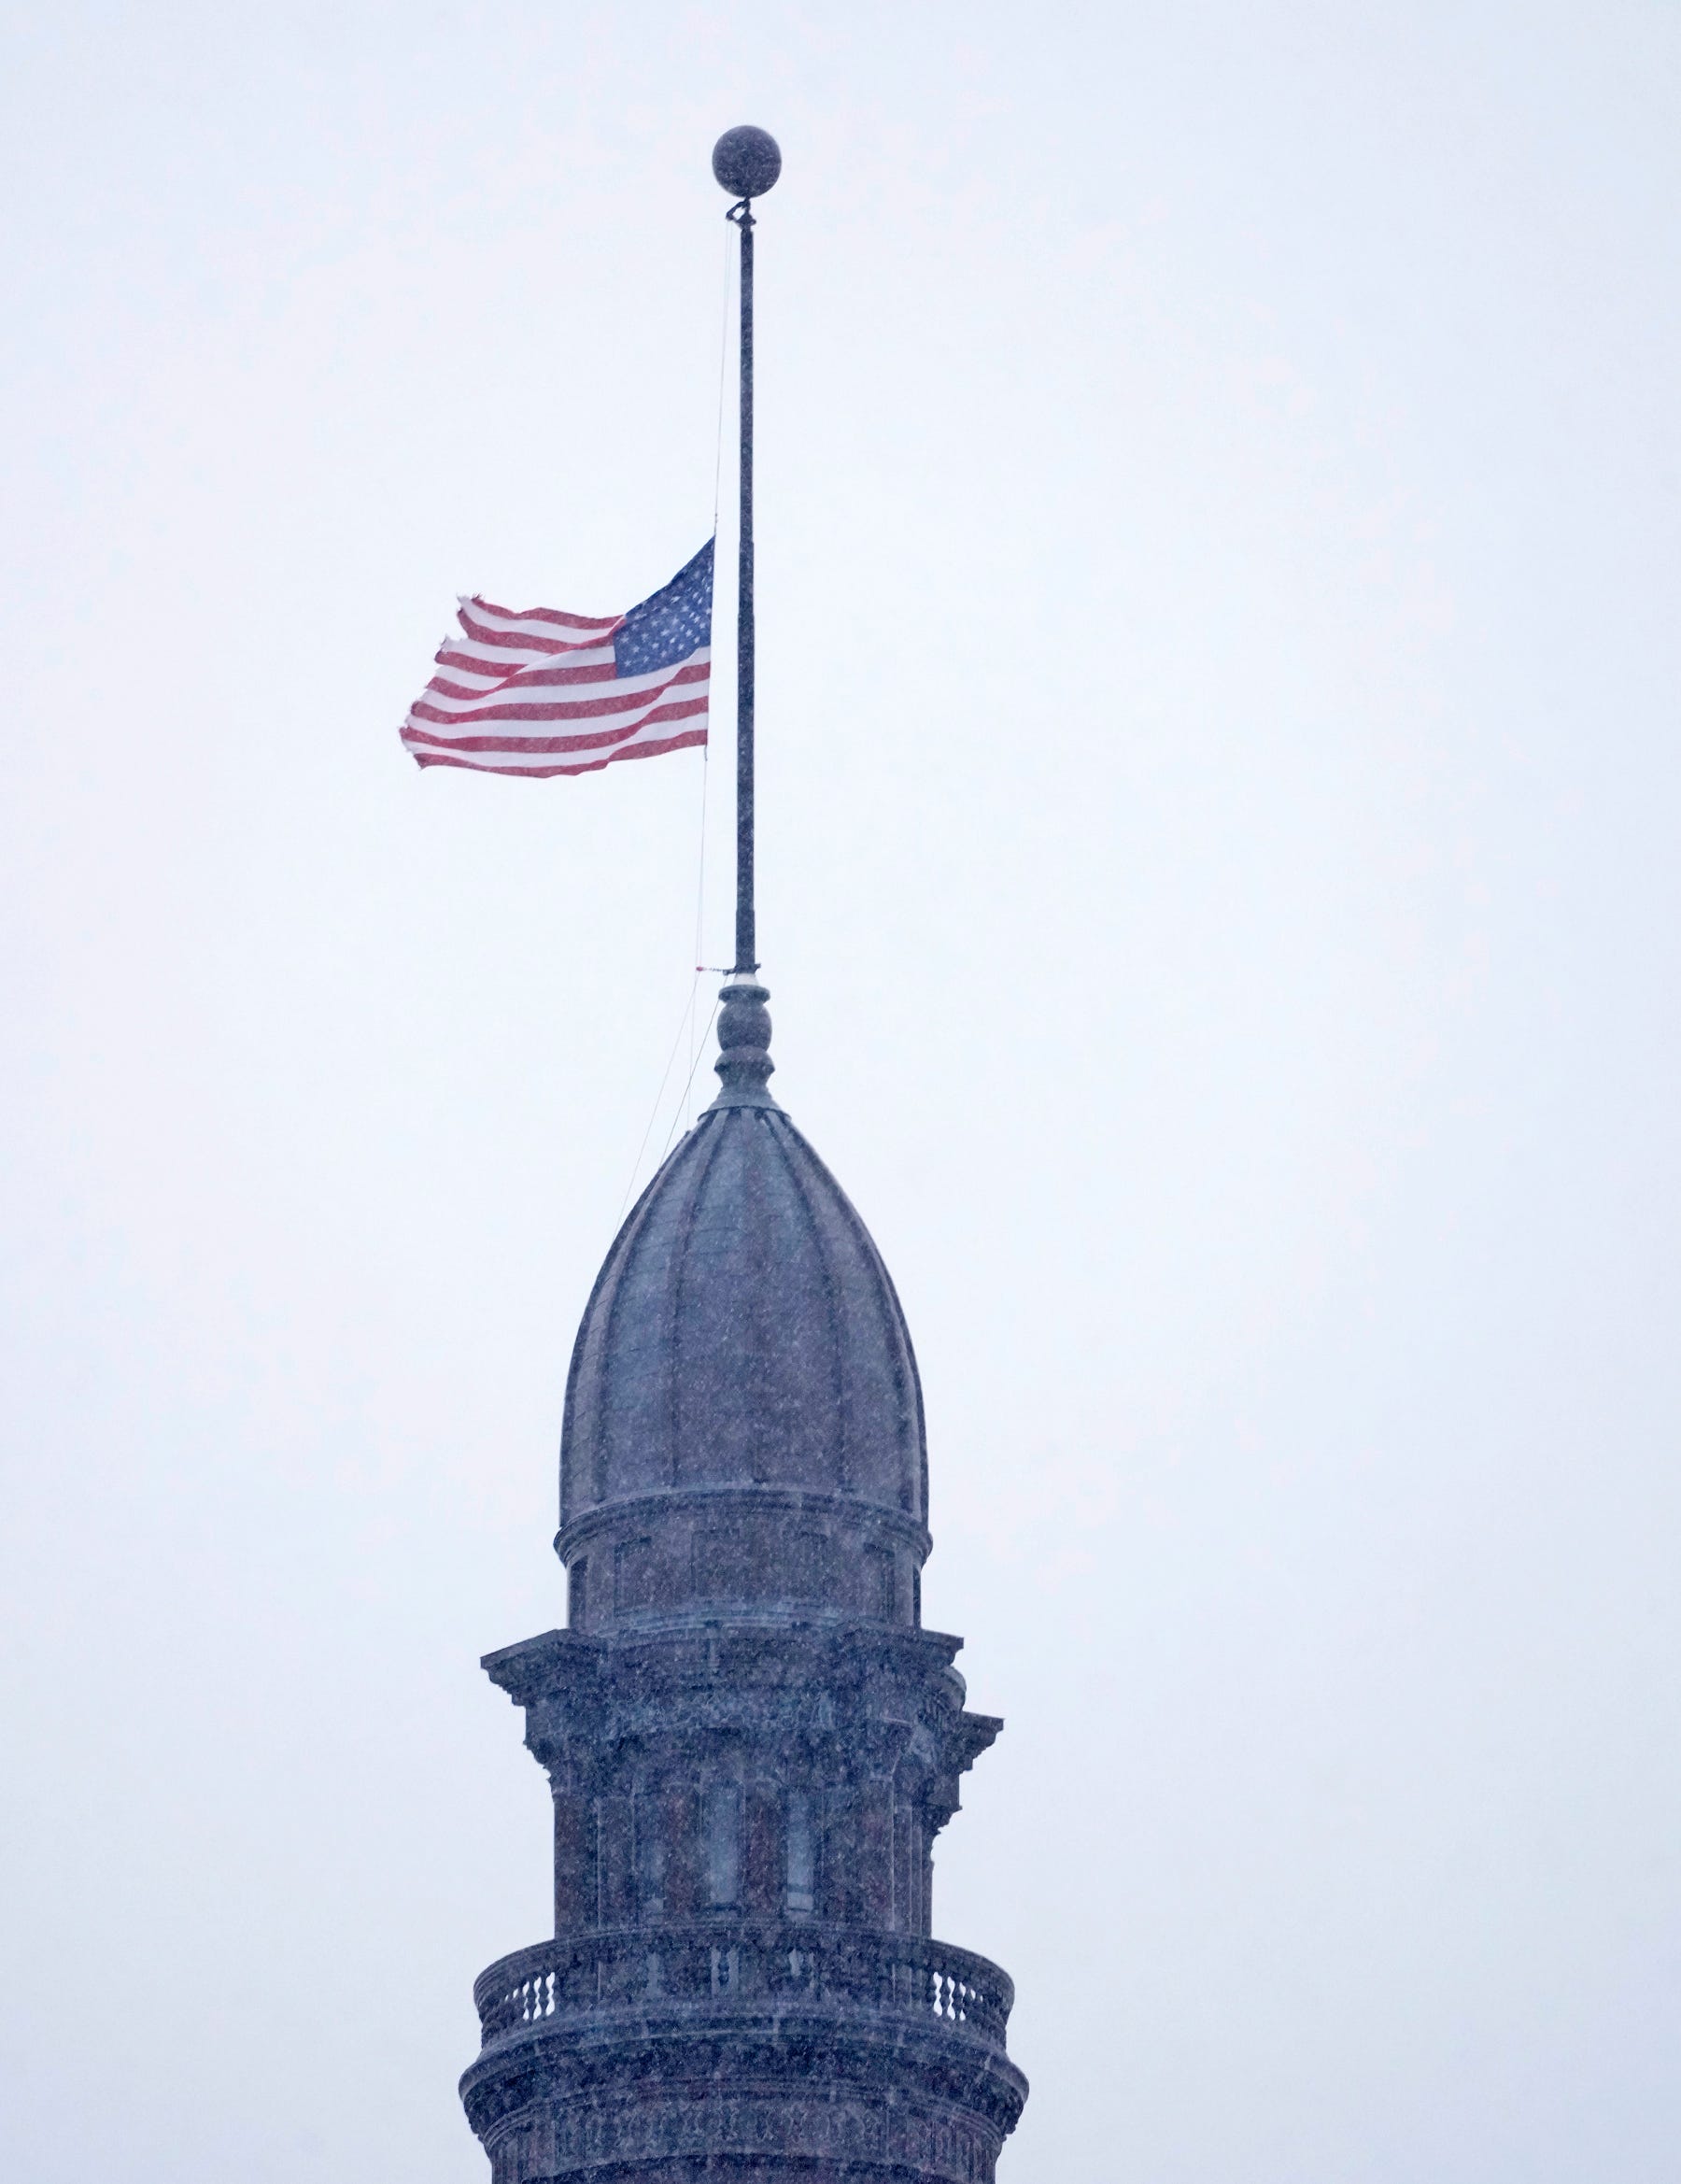 The American Flag flies at half staff at Milwaukee City Hall in Milwaukee on Thursday, Dec. 22, 2022. Gov. Tony Evers has ordered the American and Wisconsin flags to be flown at half-staff Thursday in honor of Aundre Cross, the U.S. Postal Service mail carrier who was shot and killed Dec. 9.